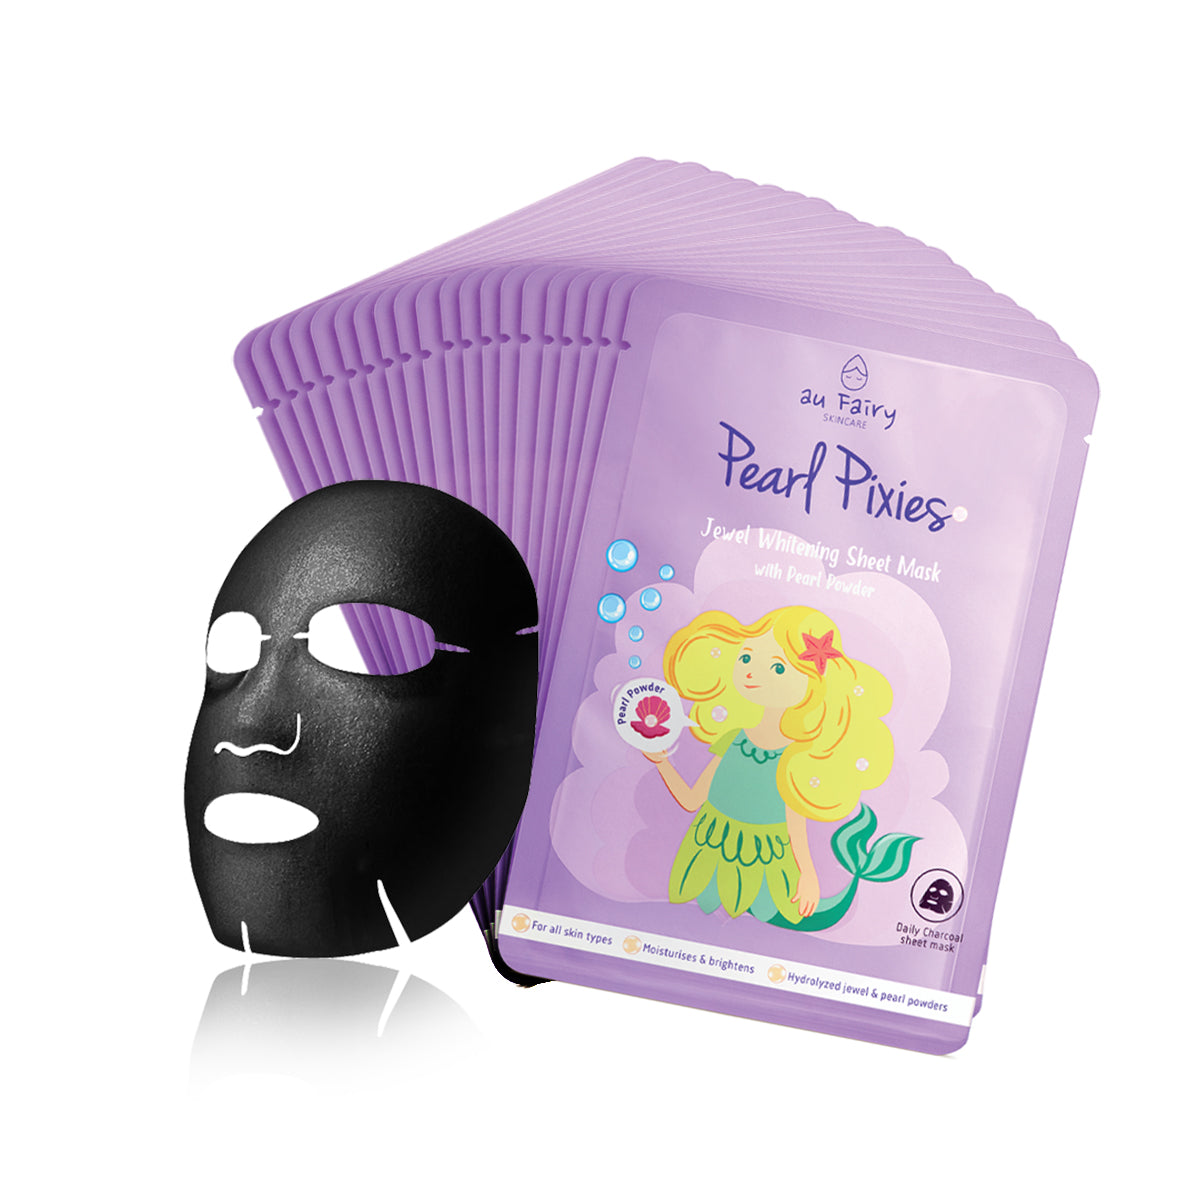 BUY 1 FREE 1: AUFAIRY Pearl Pixies Whitening Mask - Pearl Essence